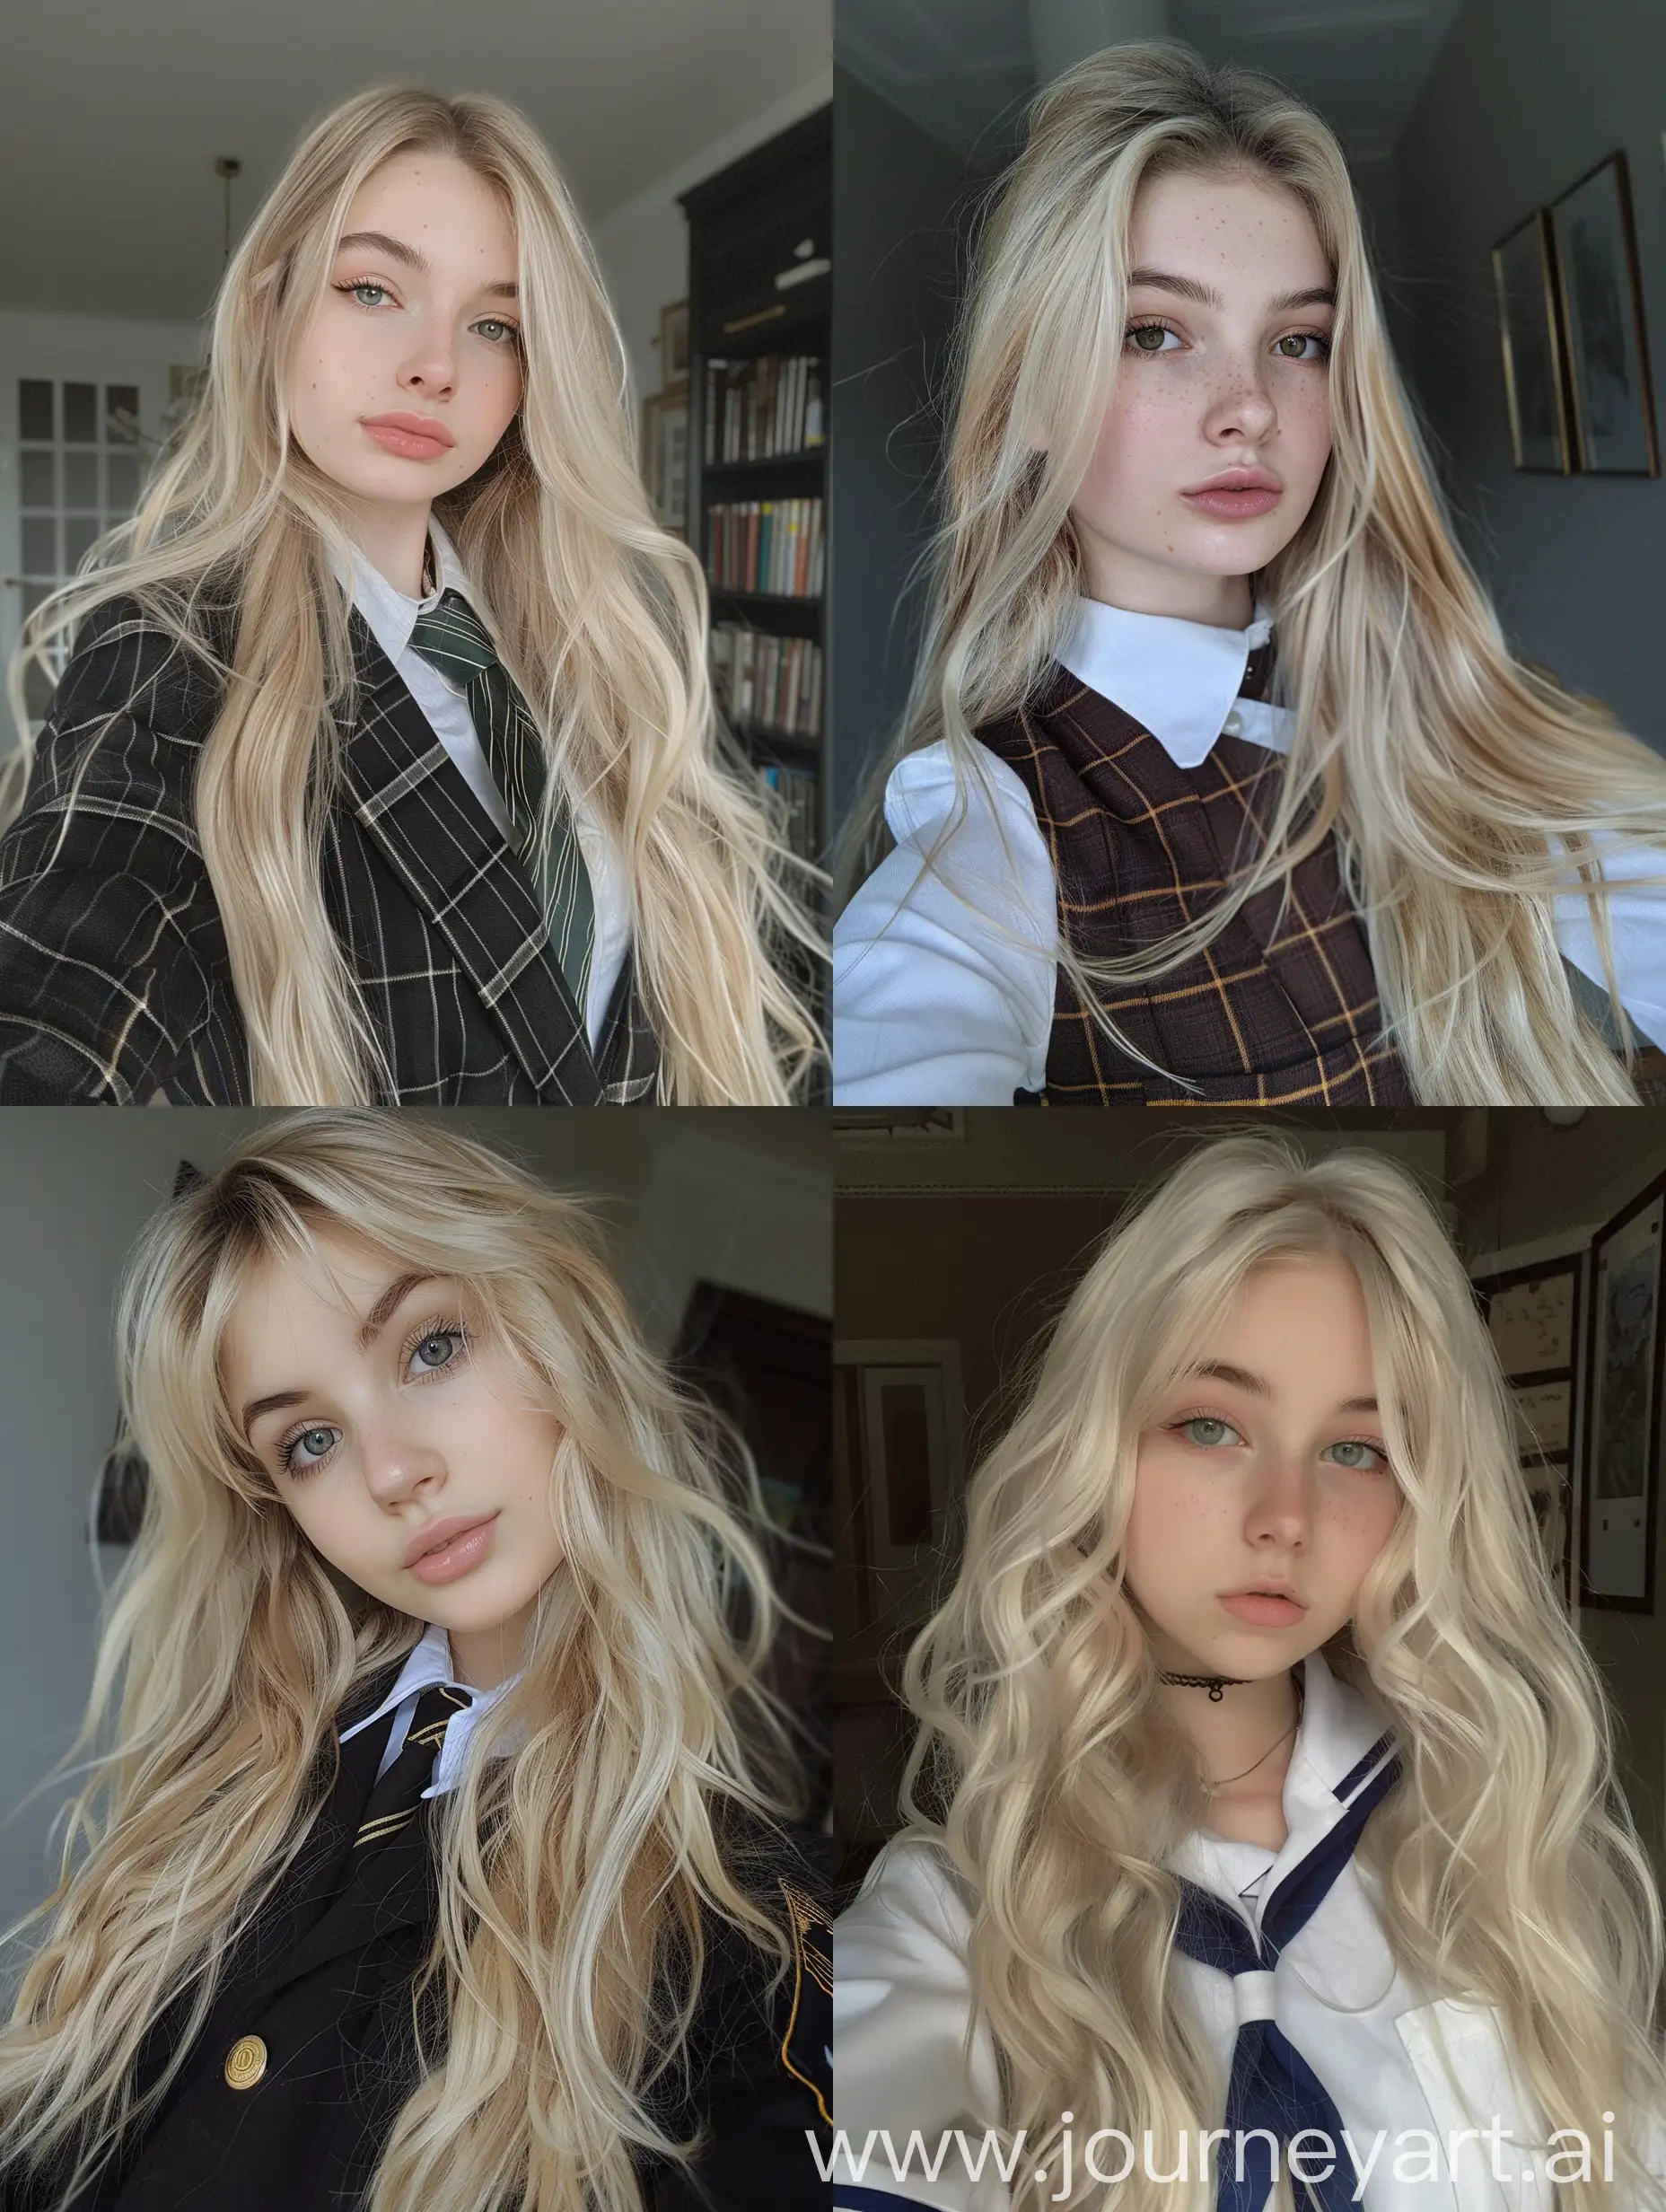 Young-Woman-Taking-Selfie-in-School-Uniform-with-Blonde-Hair